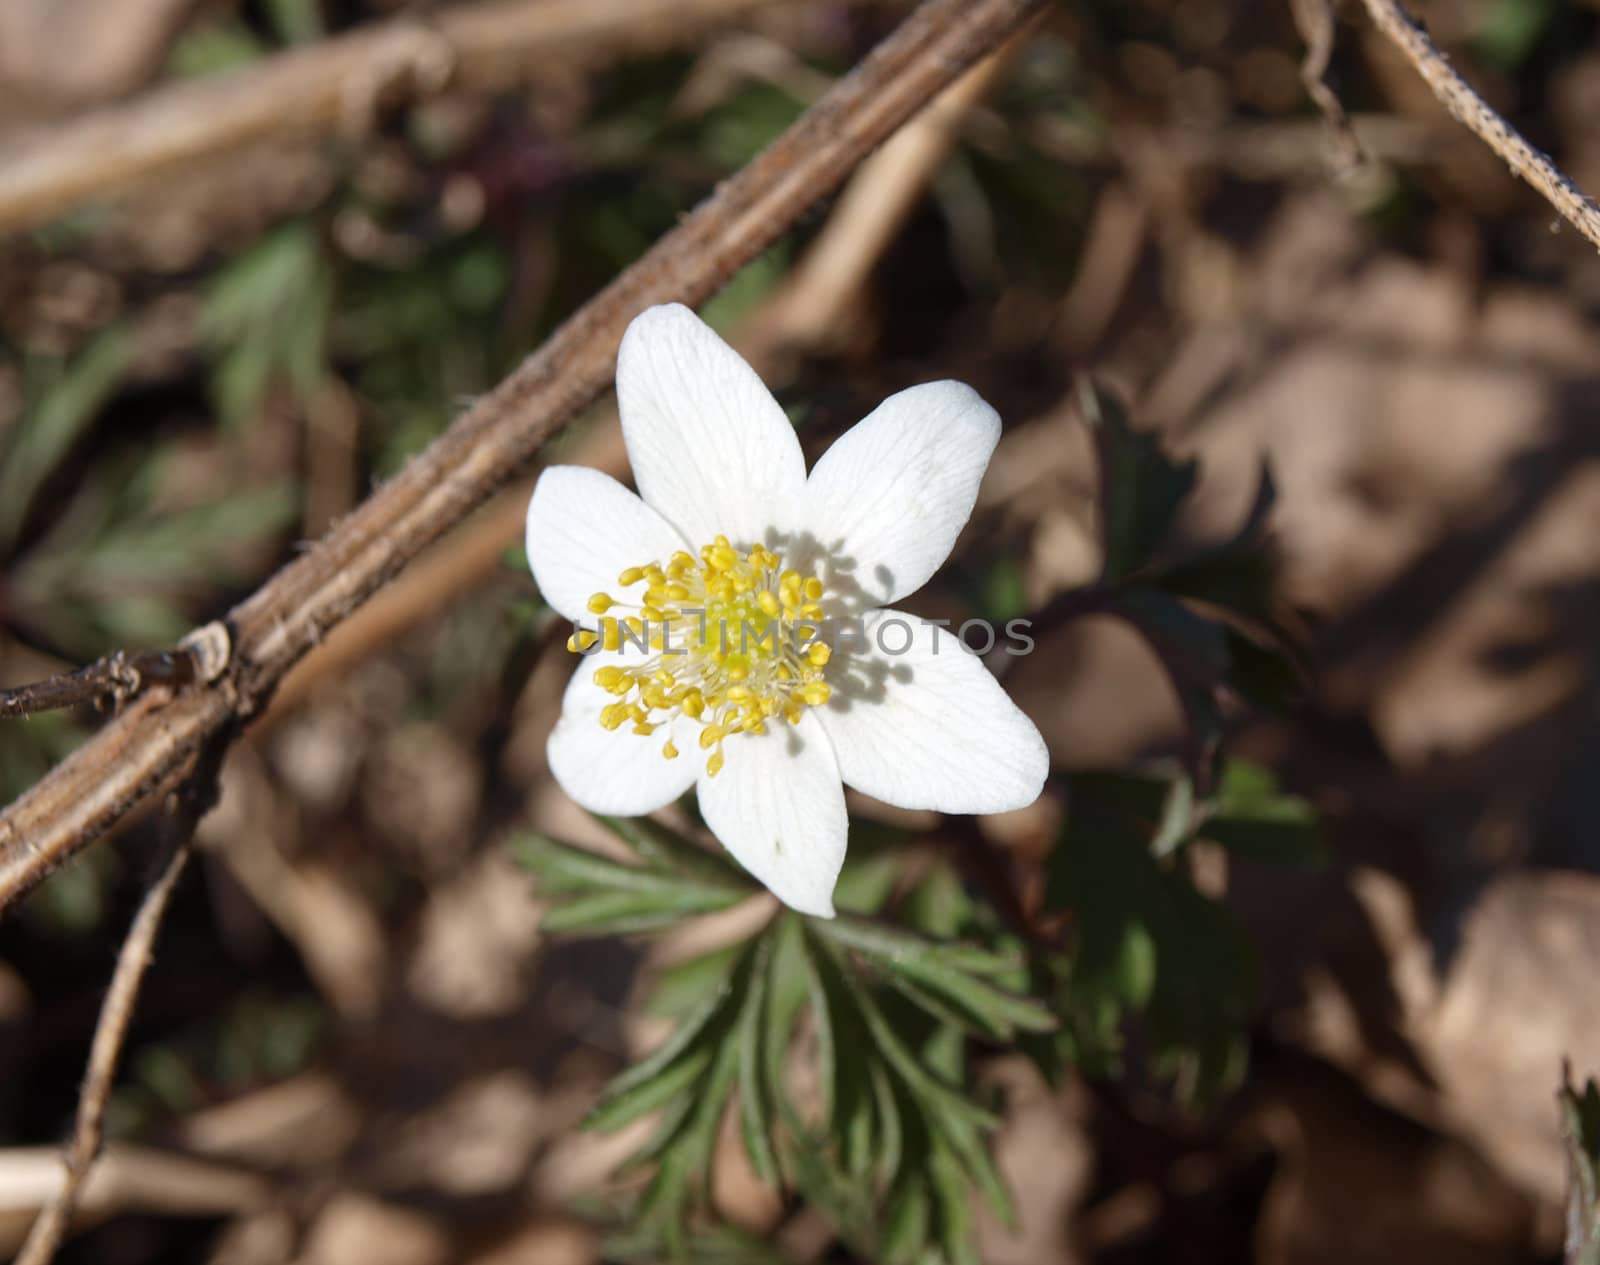 anemone, the one of the first flower after winter by renales